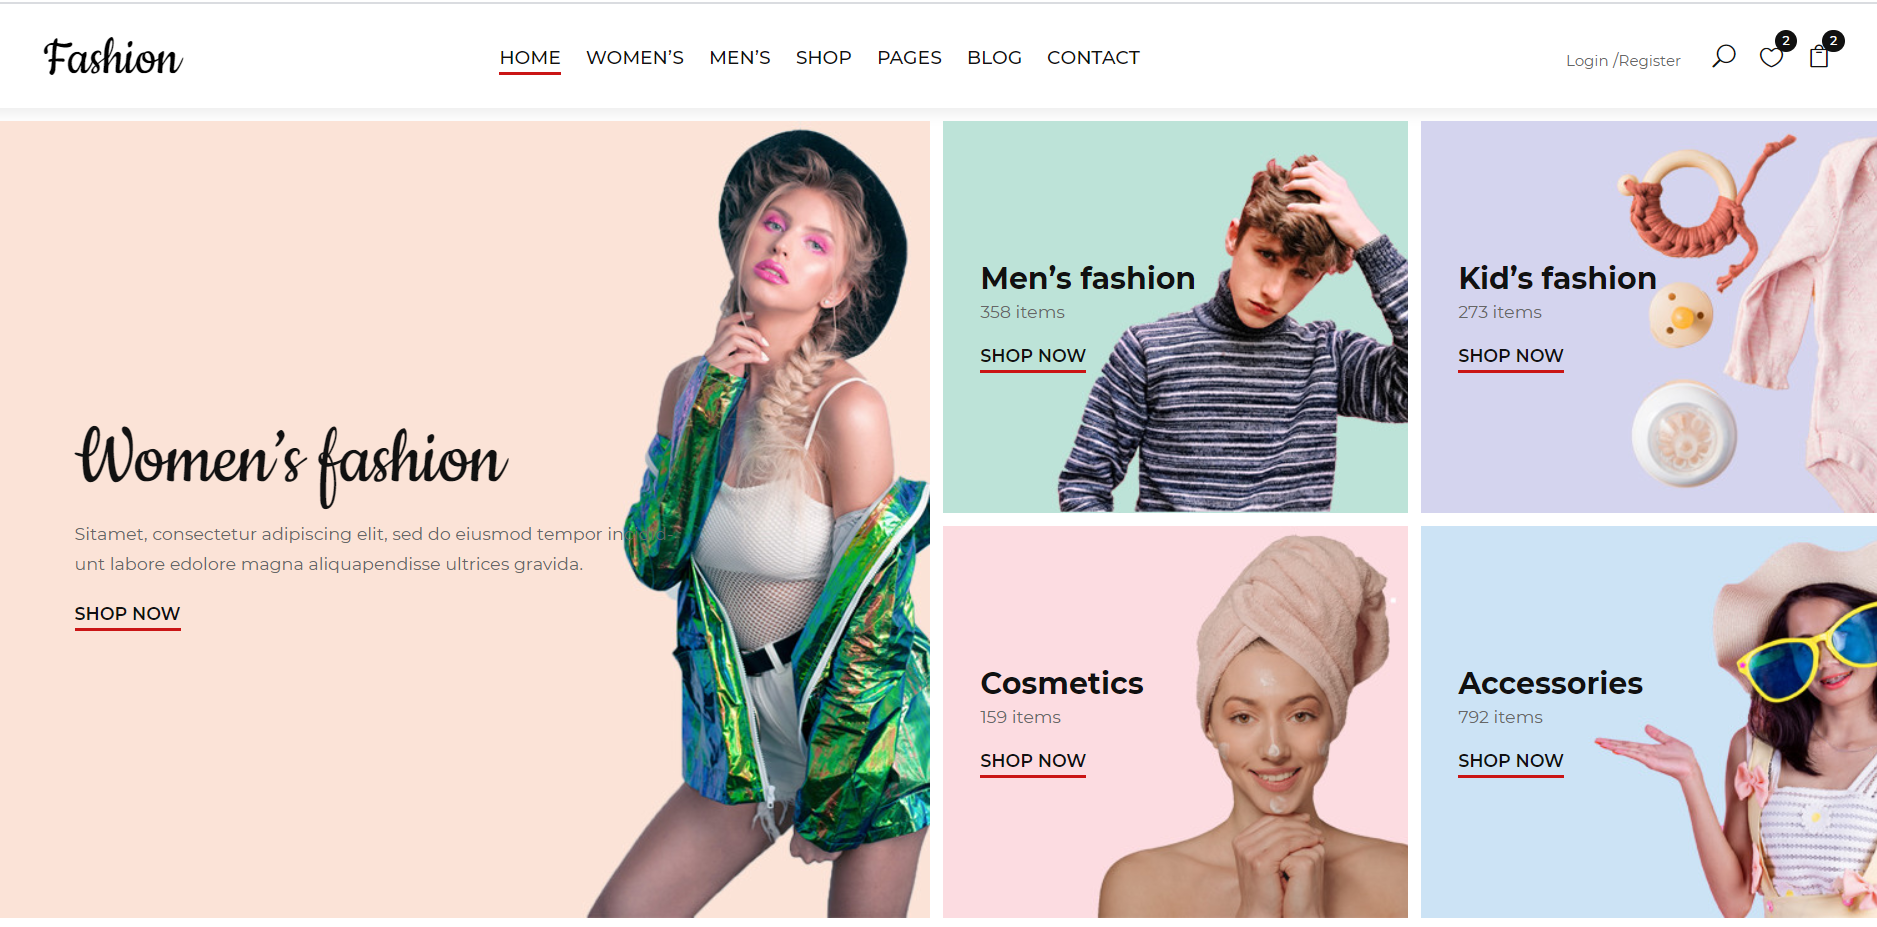 Angular 11 - Free Ecommerce Template for Fashion Website